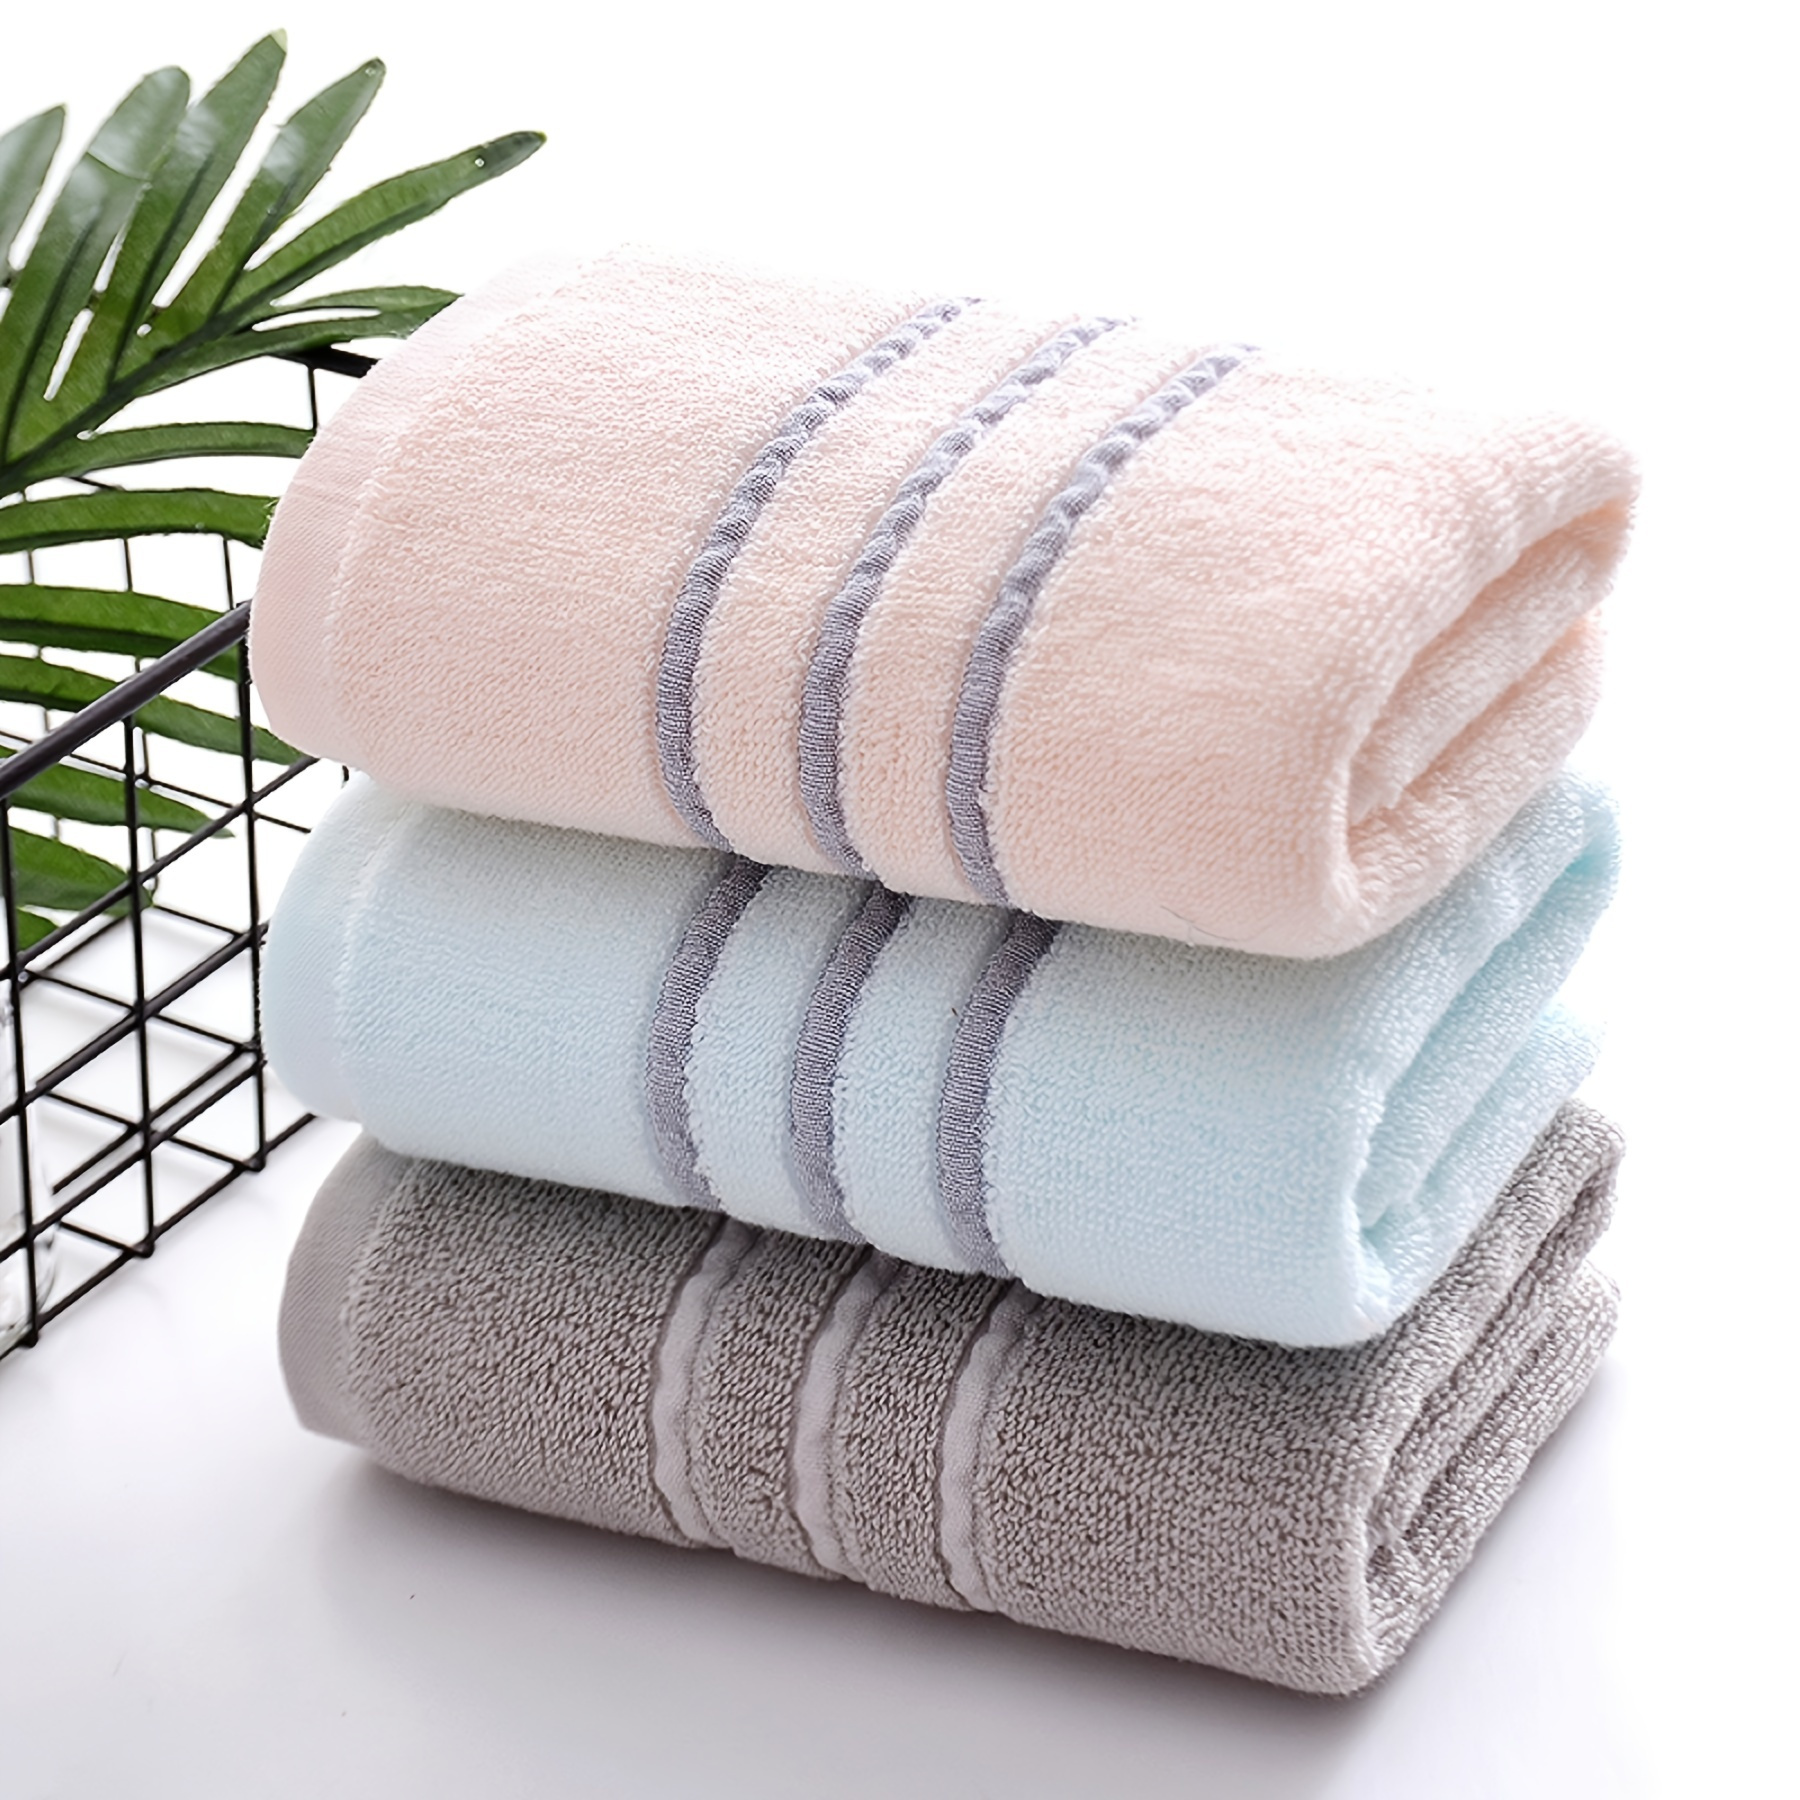 Hand Towels for Bathroom - VANZAVANZU Premium Hand Towels Set (13×29 in)  Ultra Soft and Highly Absorbent Bathroom Hand Towels Upgraded (Cream  White+Turquoise+Grey Blue+Wedgewood+Dark Grey+Navy Blue) 